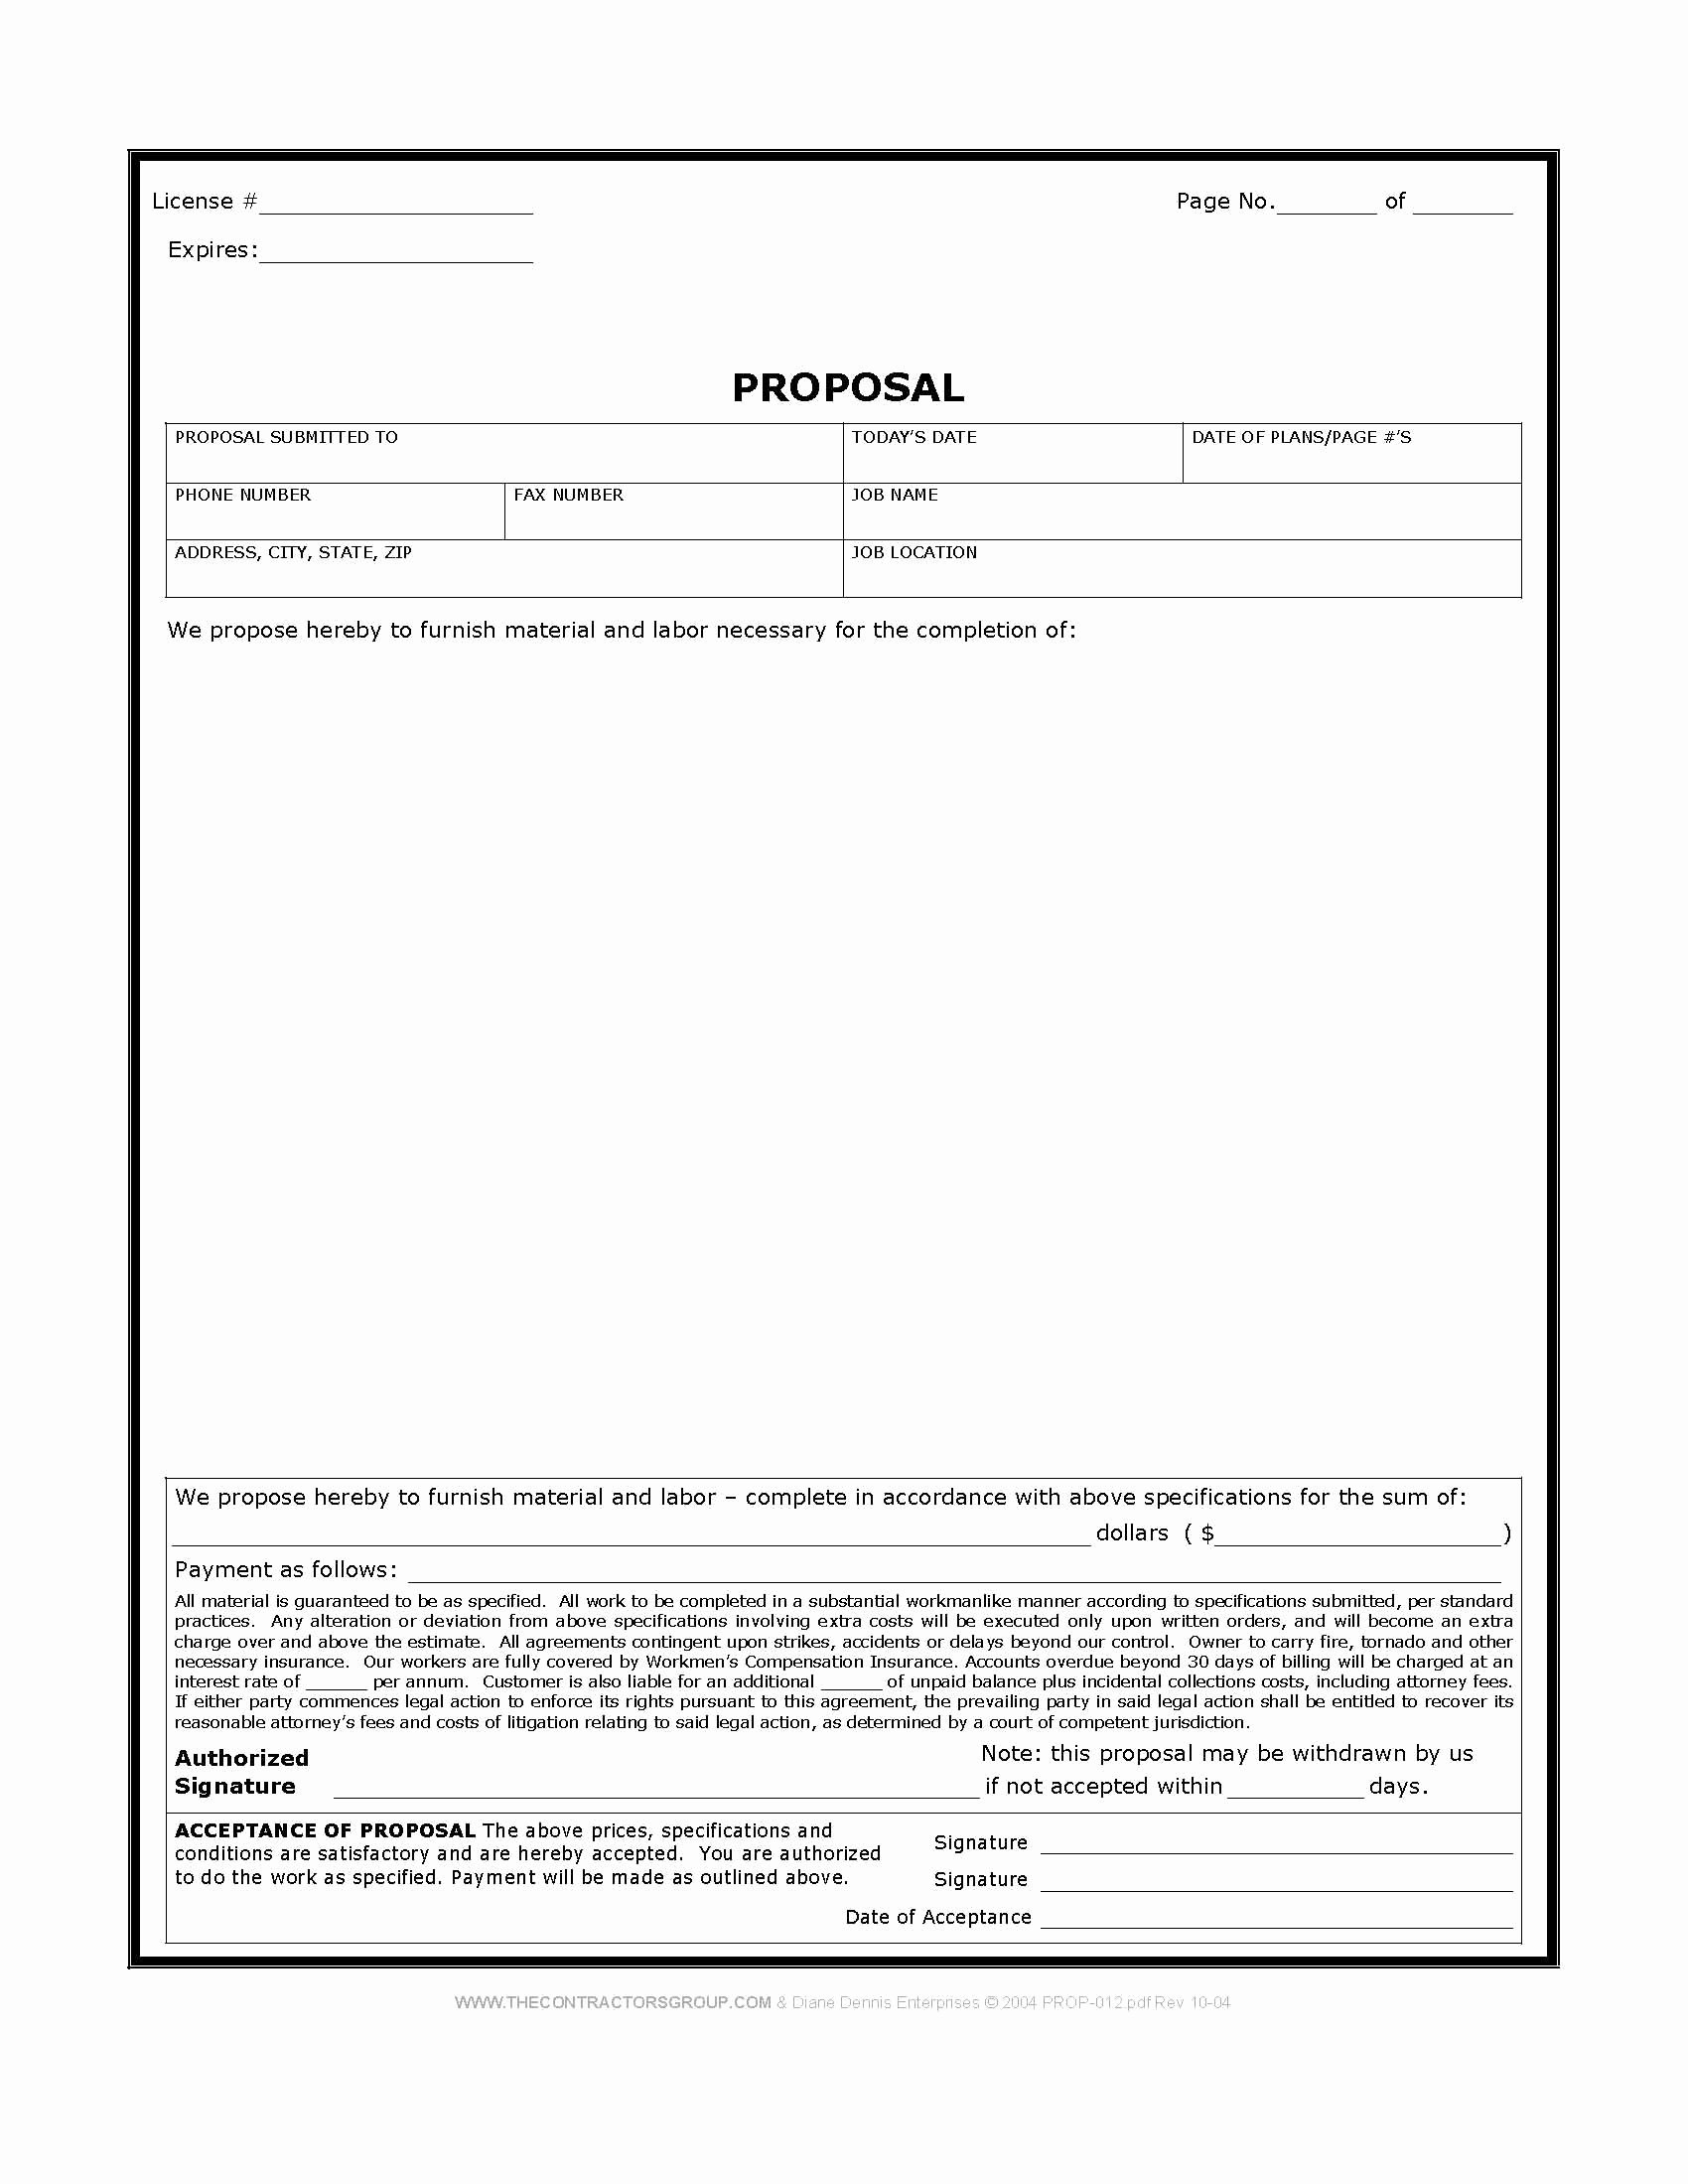 Free Proposal form Template Awesome Free Print Contractor Proposal forms